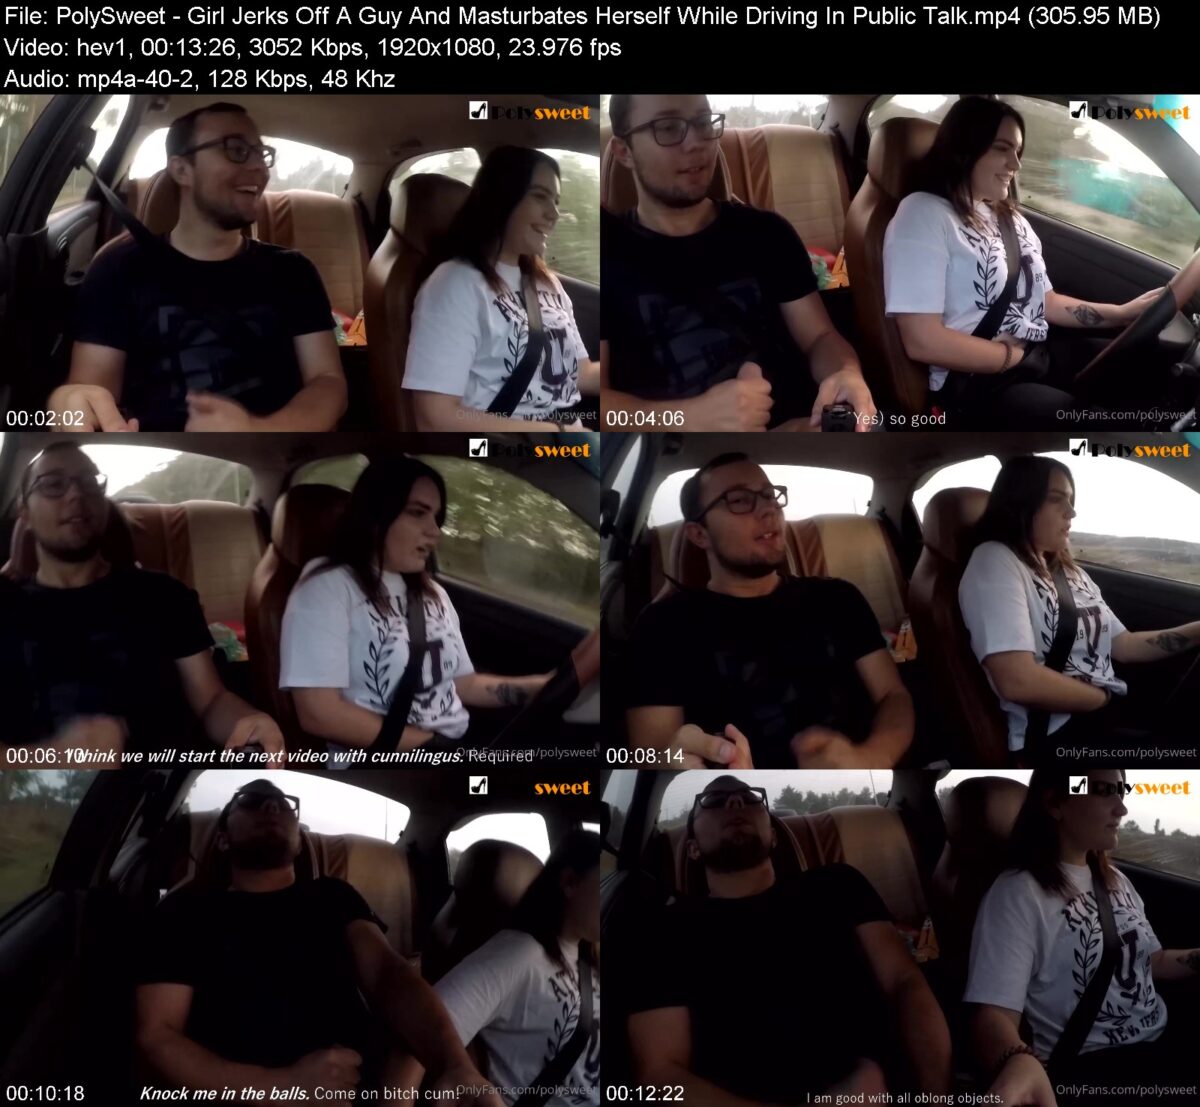 Actress: PolySweet. Title and Studio: Girl Jerks Off A Guy And Masturbates Herself While Driving In Public Talk